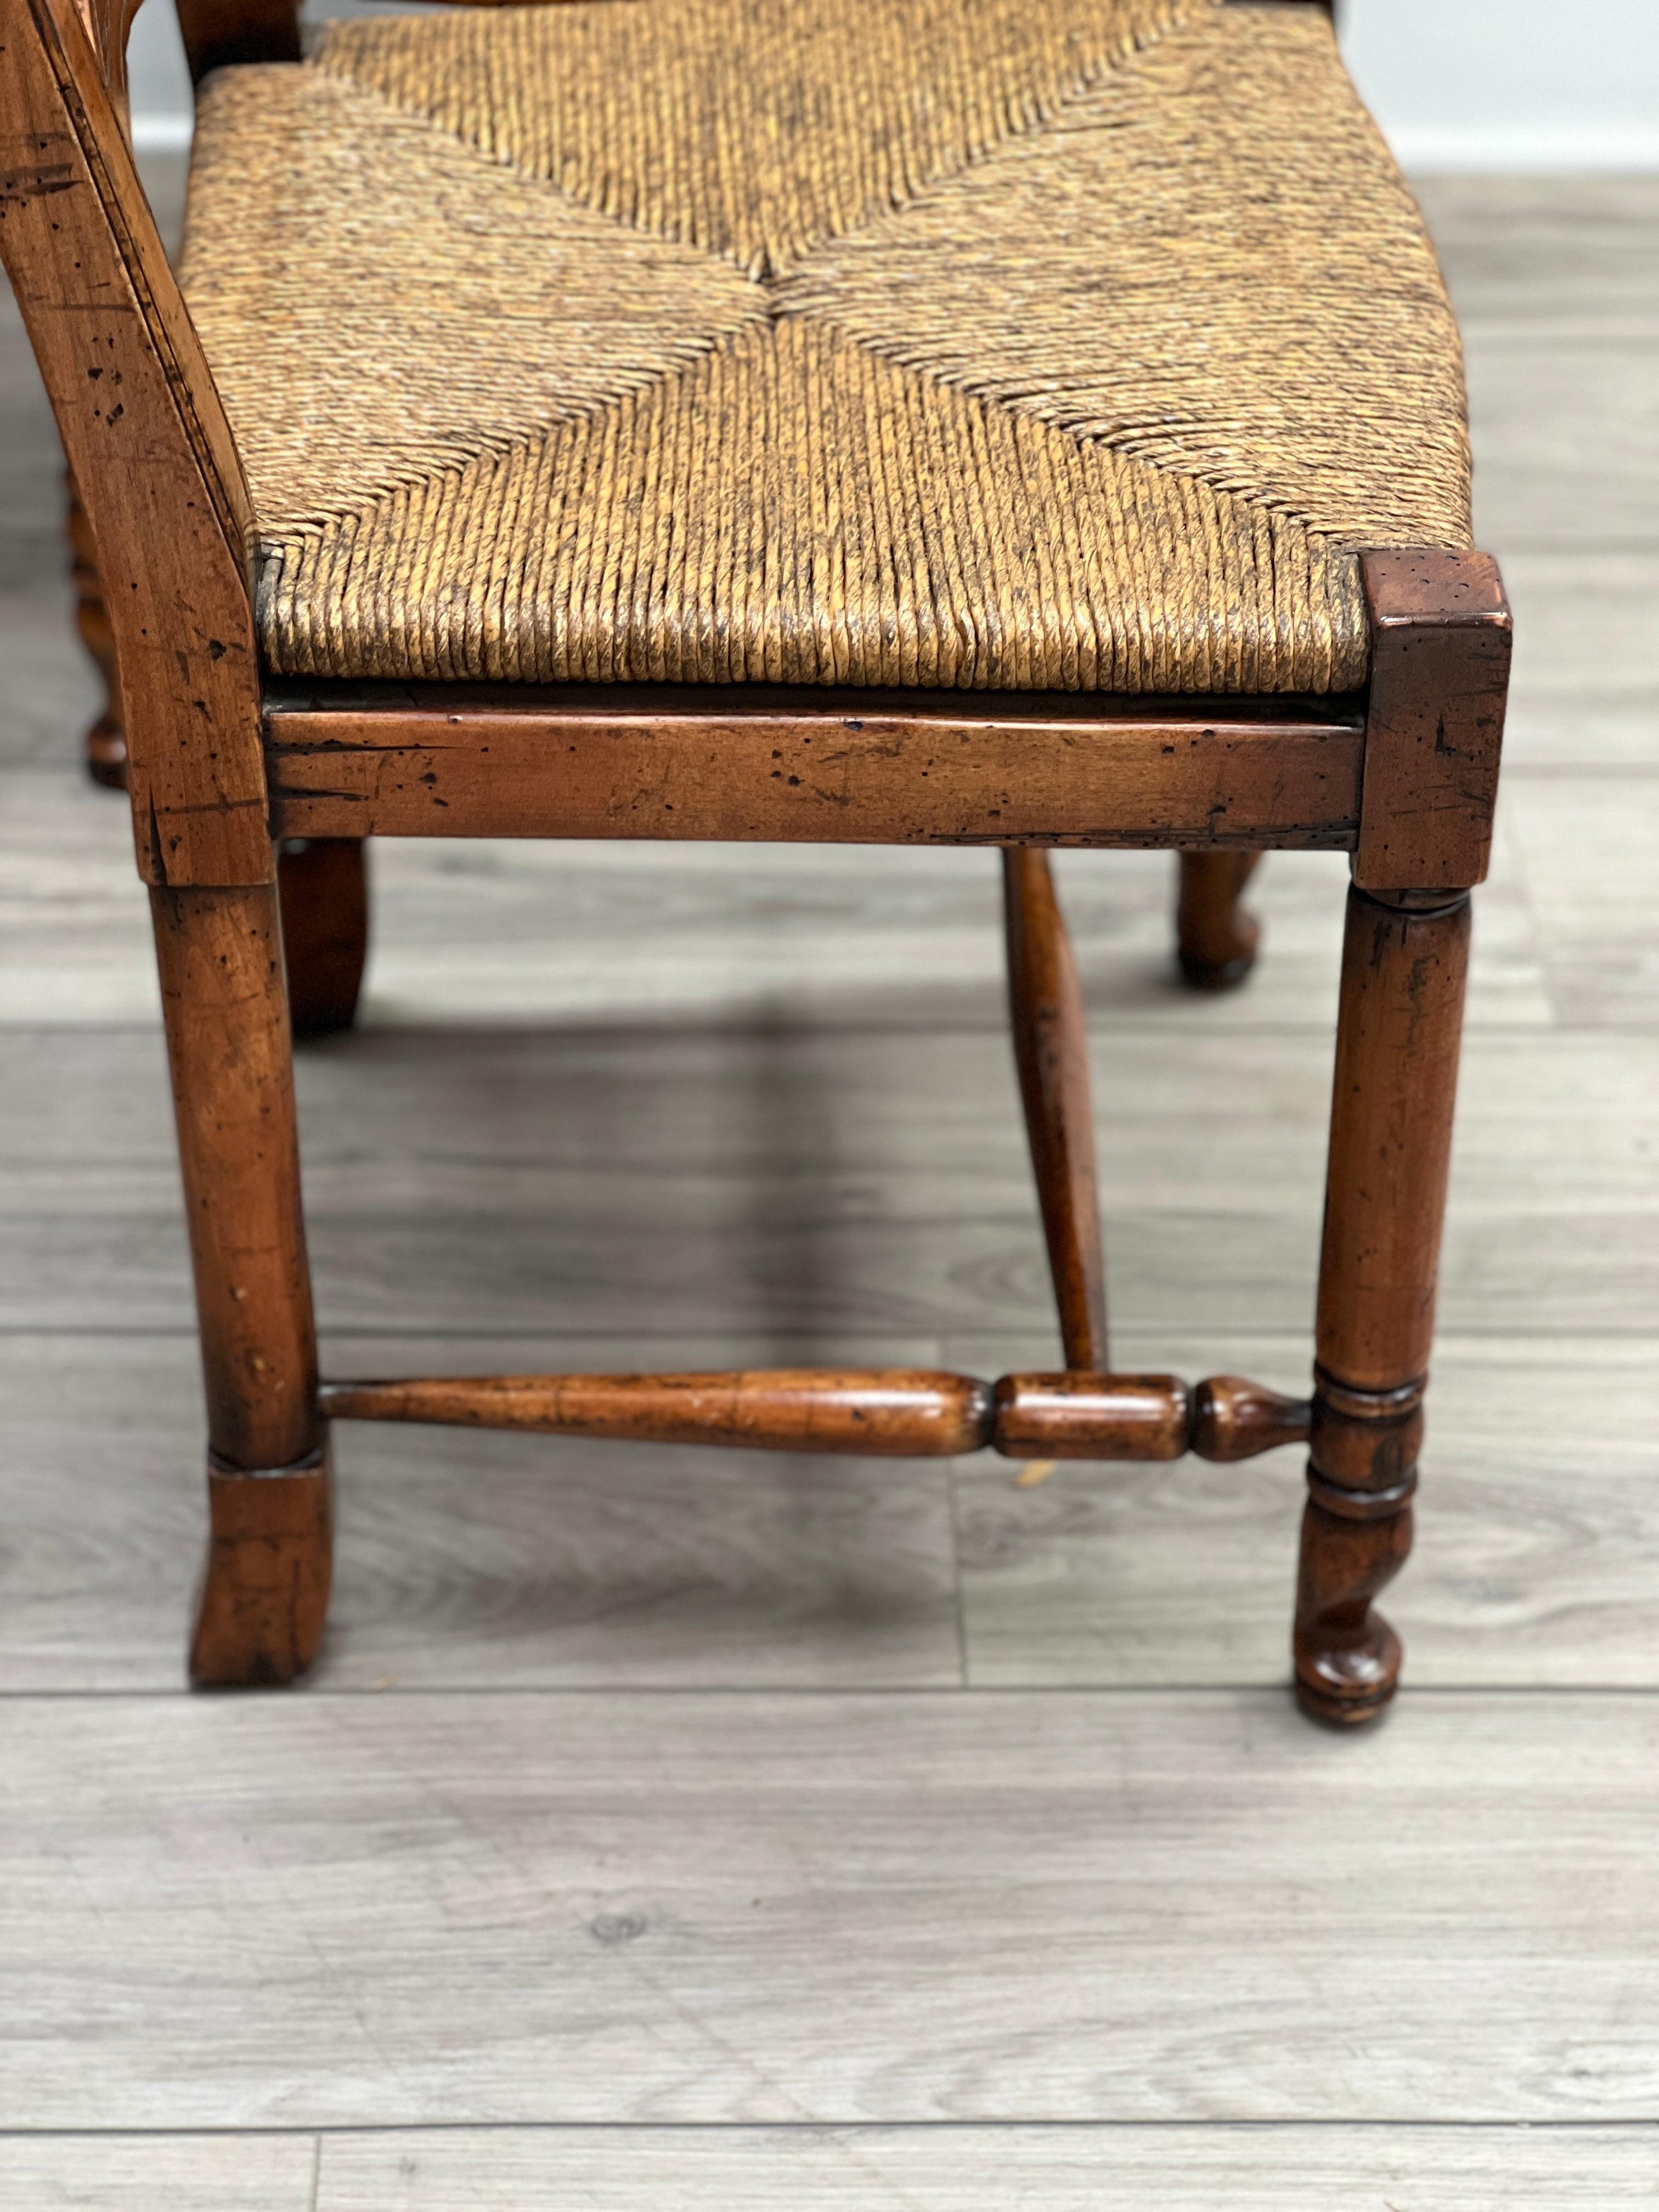 Hand-Woven Set of French Provincial Style Ladder Back Chairs